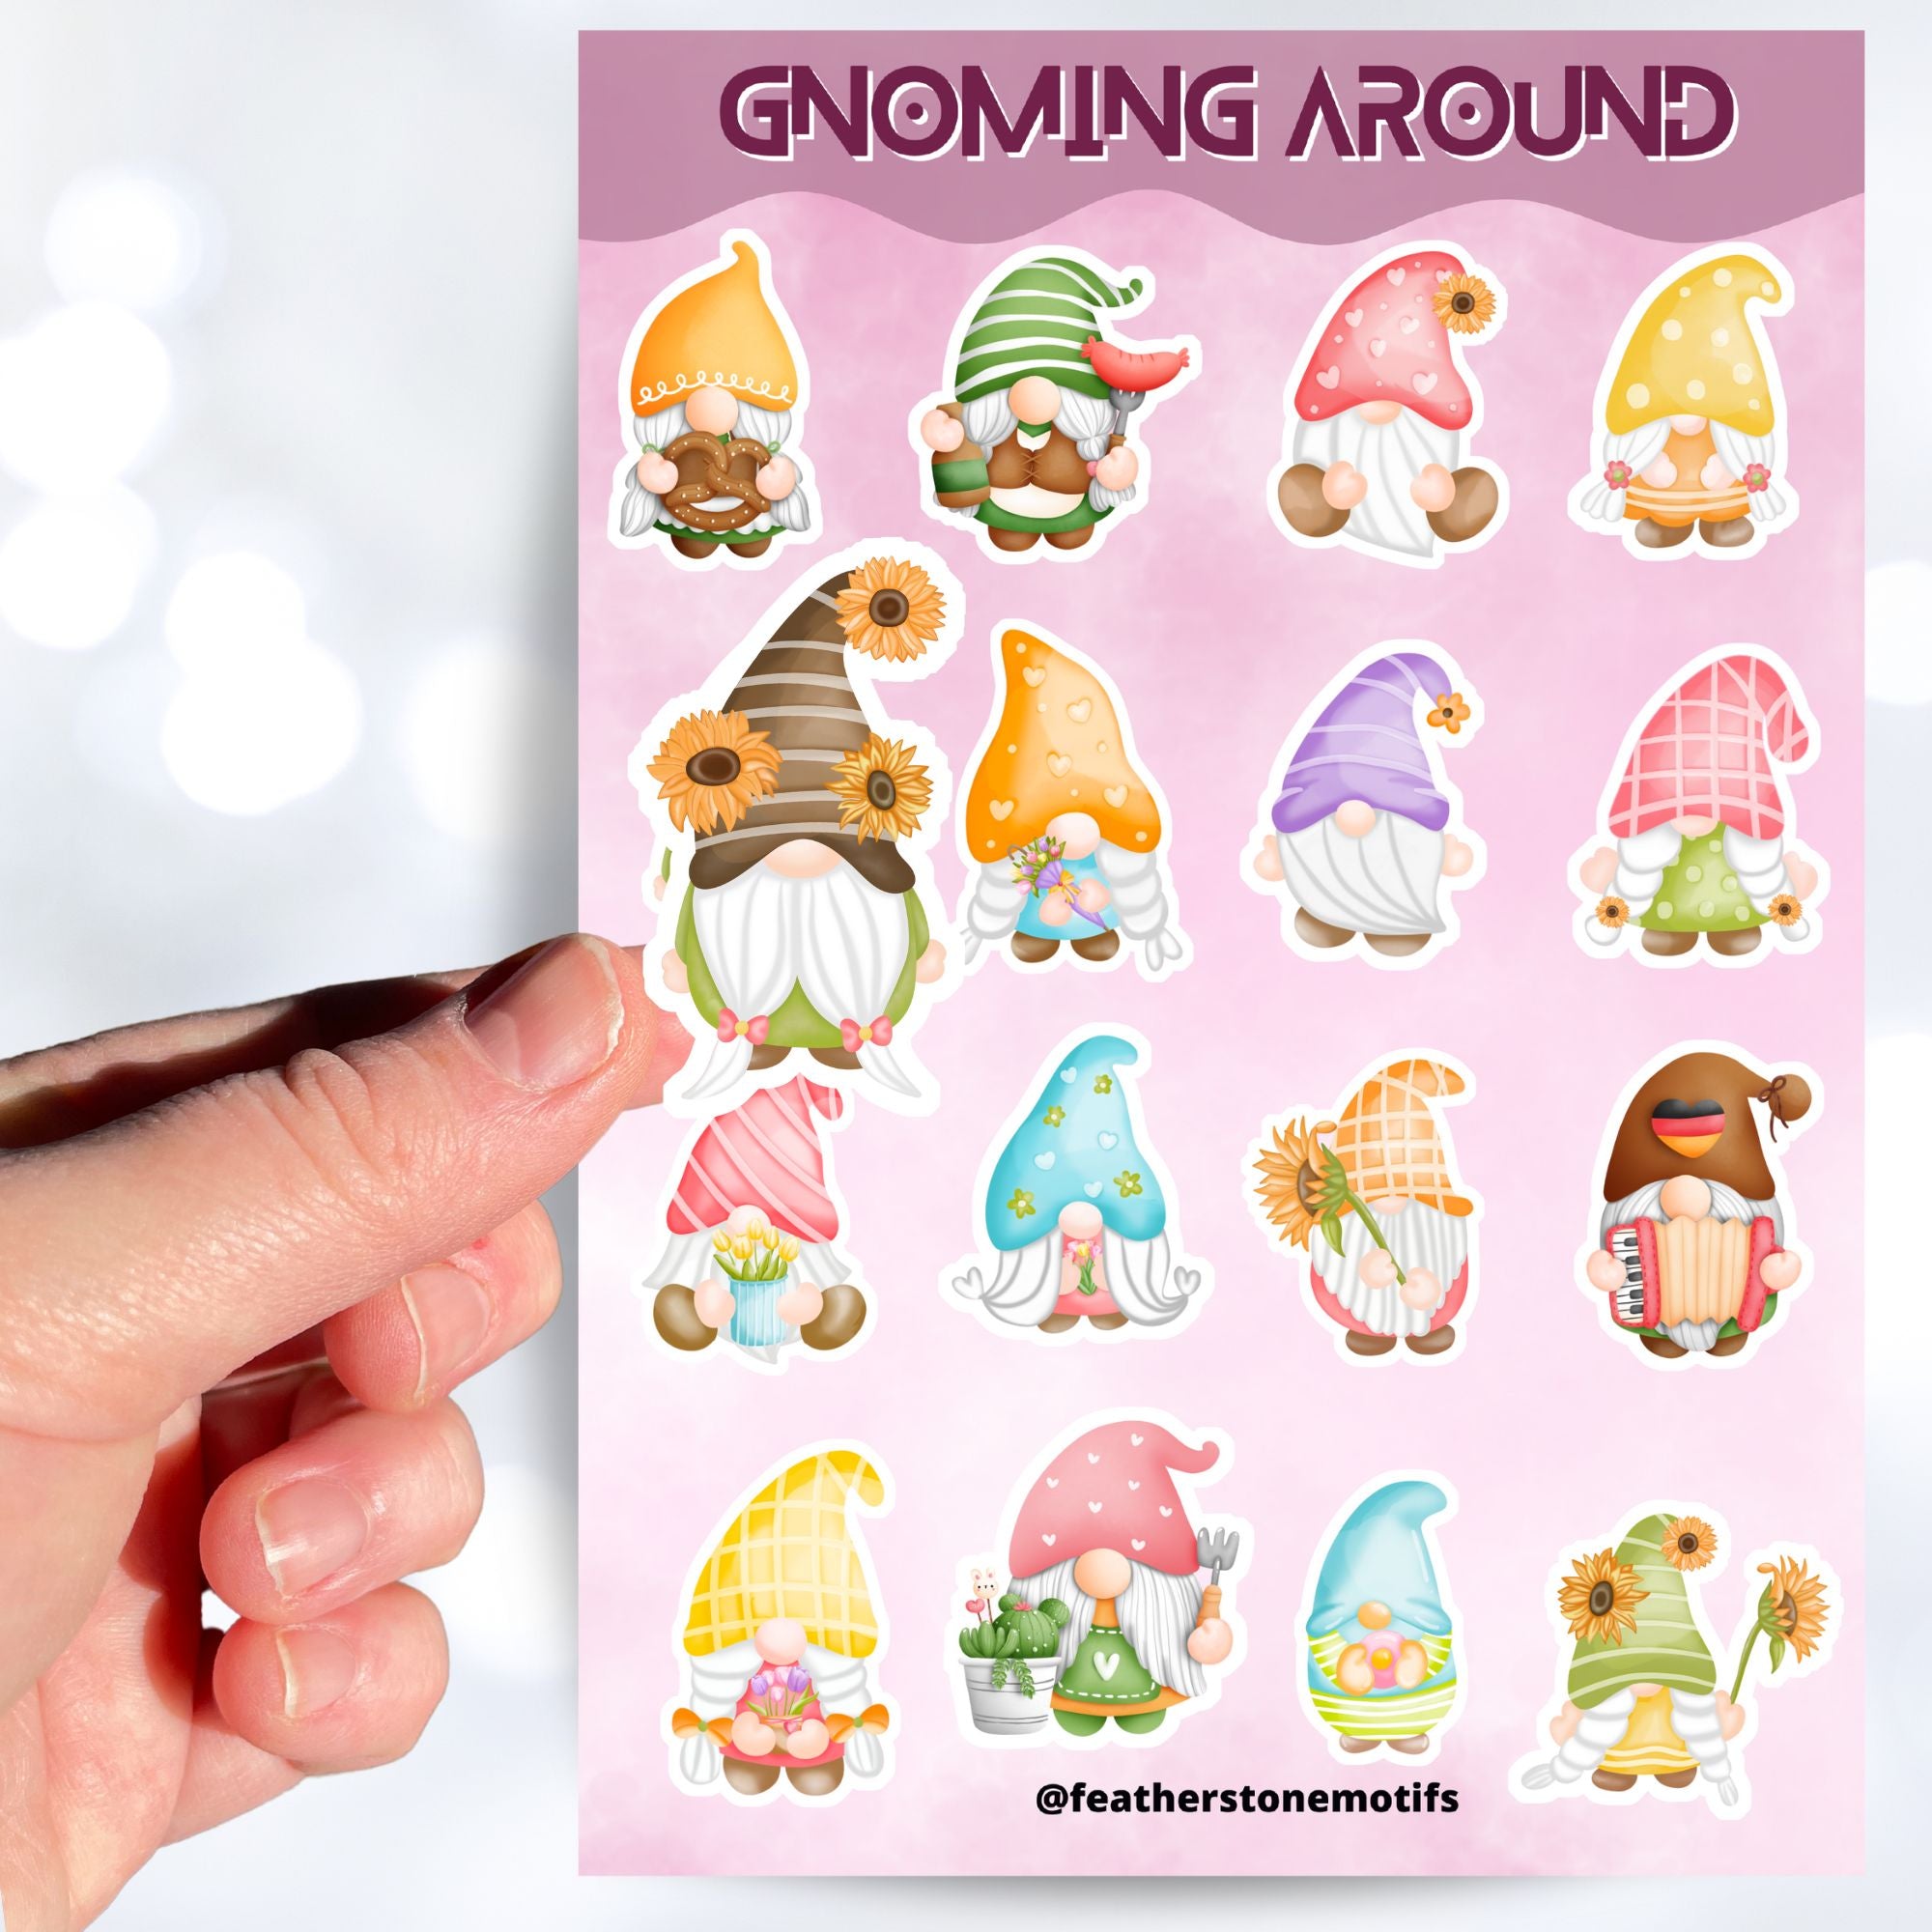 Gnomes, gnomes, and more gnomes! This sticker sheet has 16 unique gnome stickers for people who love their Gnomies. This image shows a hand holding a sticker of a gnome with sunflowers in her hair above the sticker sheet.